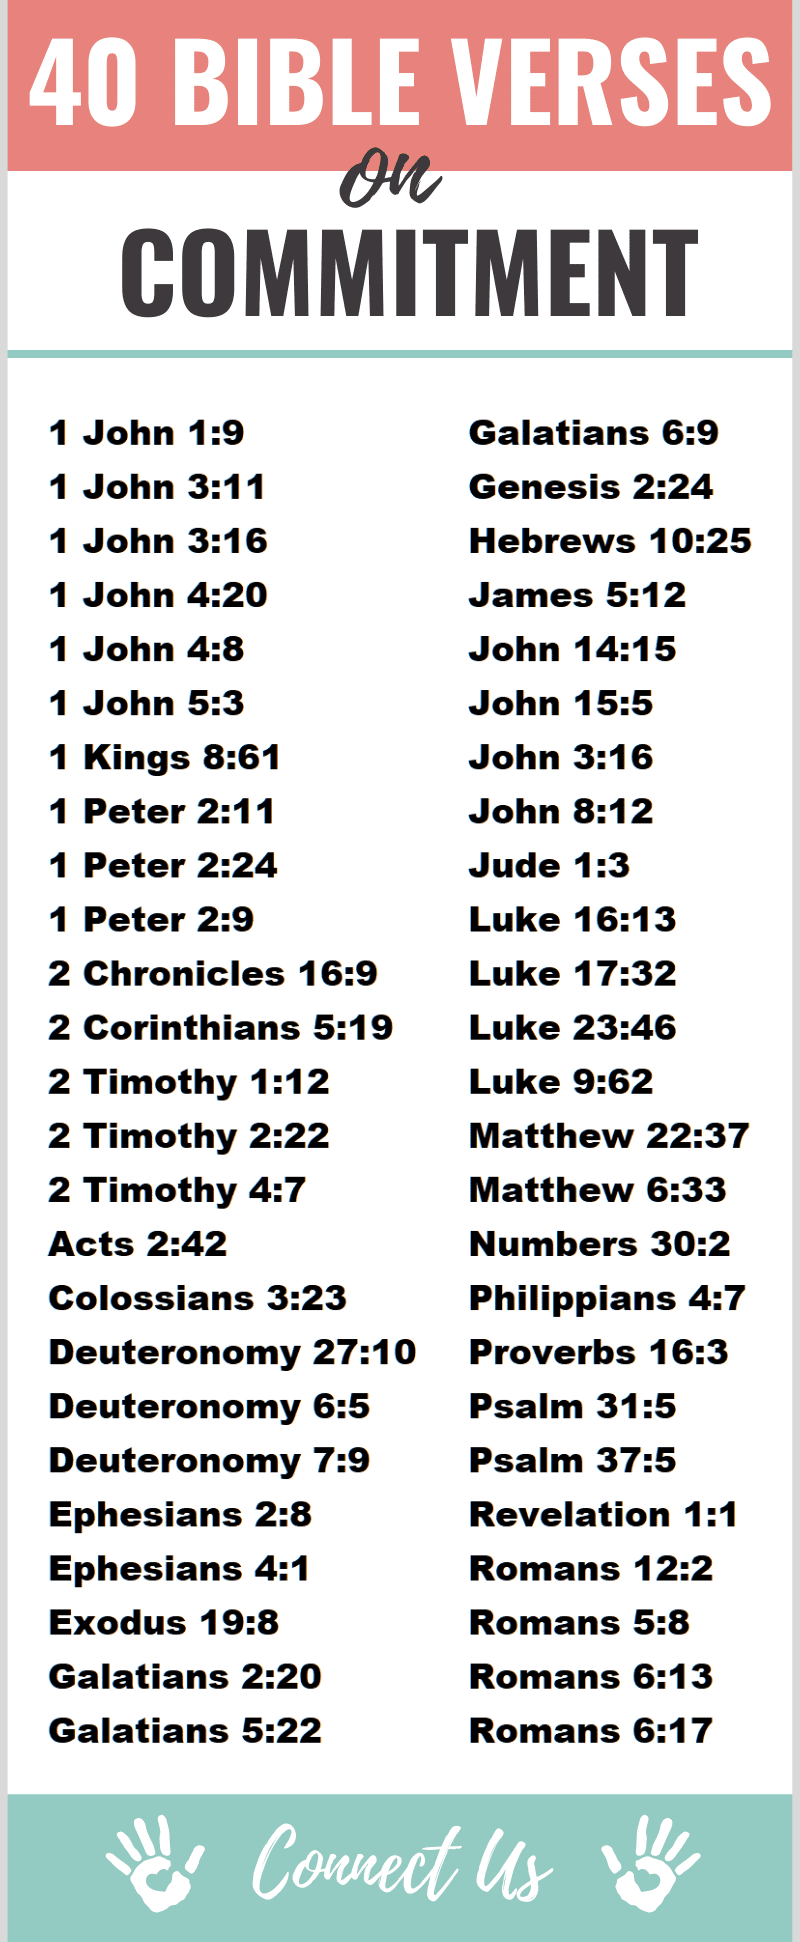 Bible Verses on Commitment